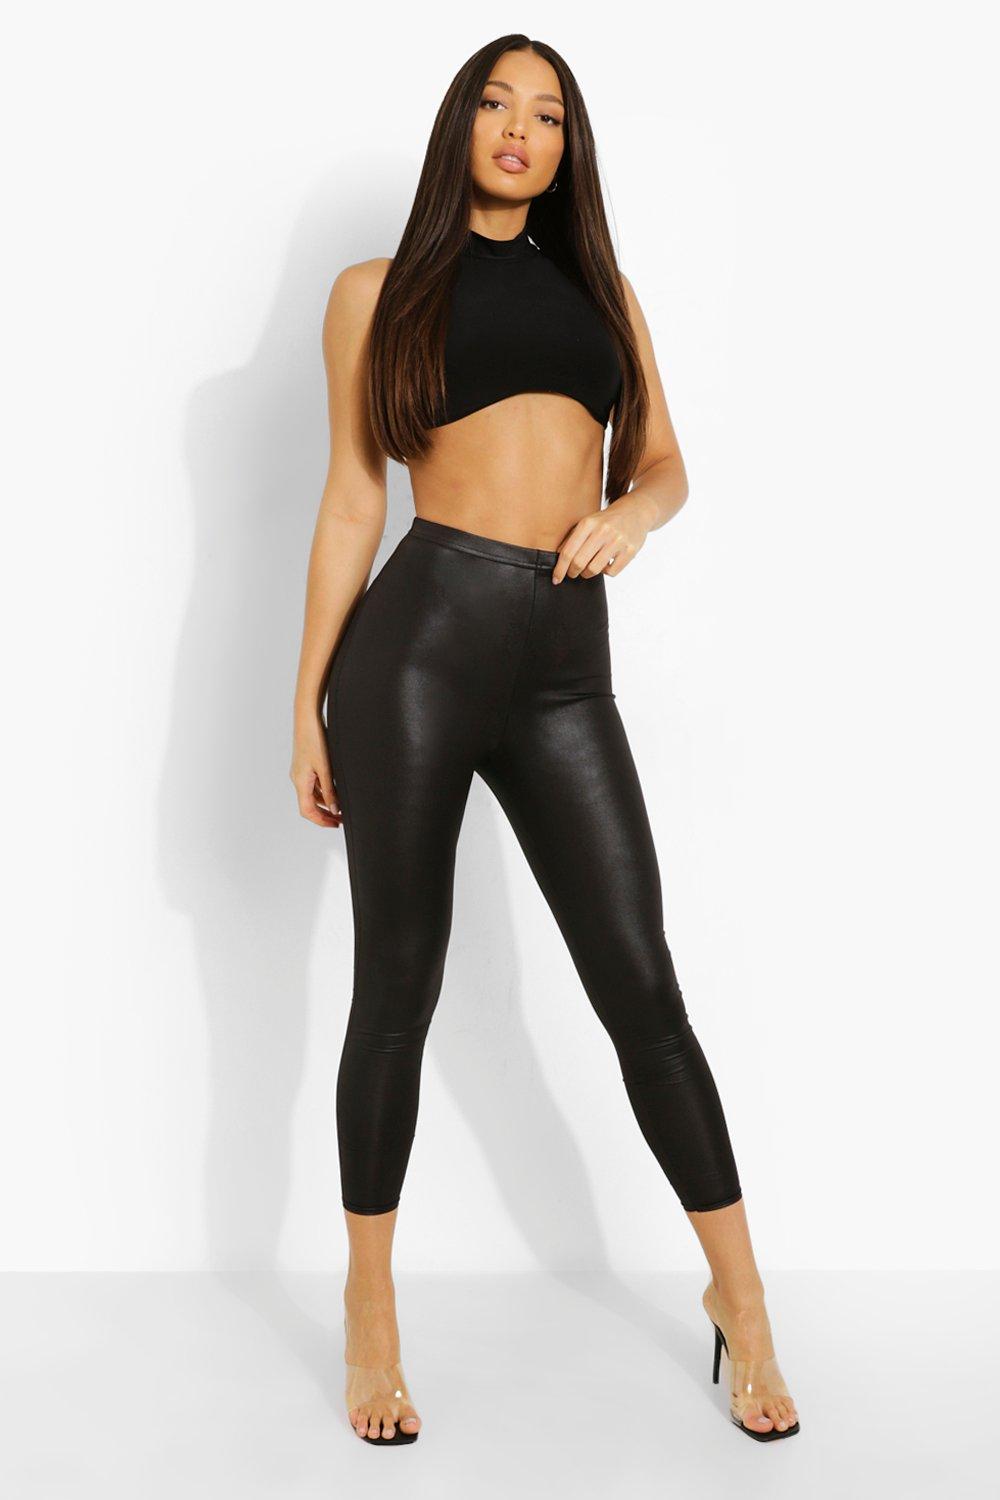 Leather Look Ruched Bum Leggings #sponsored, , #SPONSORED, #PAID, #Ruched, # Bum, #Leggings, #Leather